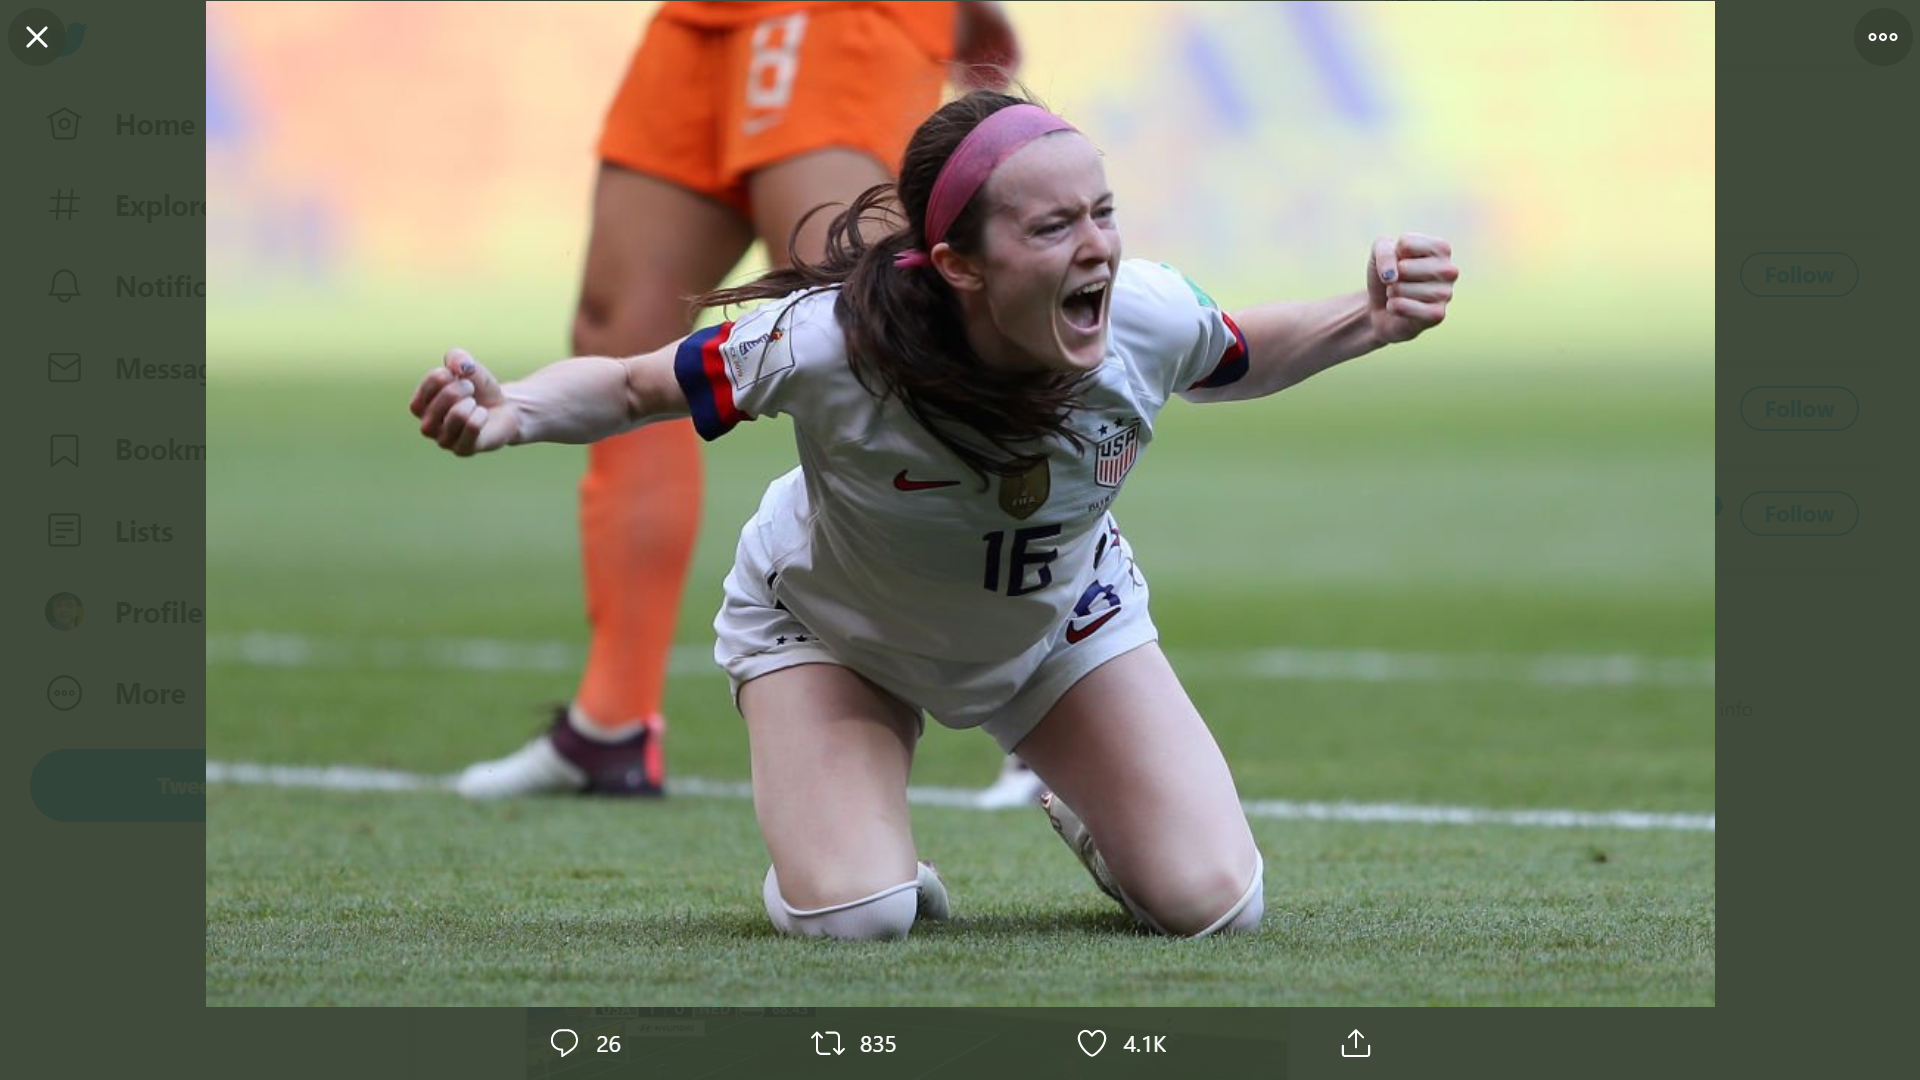 Rose Lavelle’s goal in world cup final (2019) tweeted on Twitter.